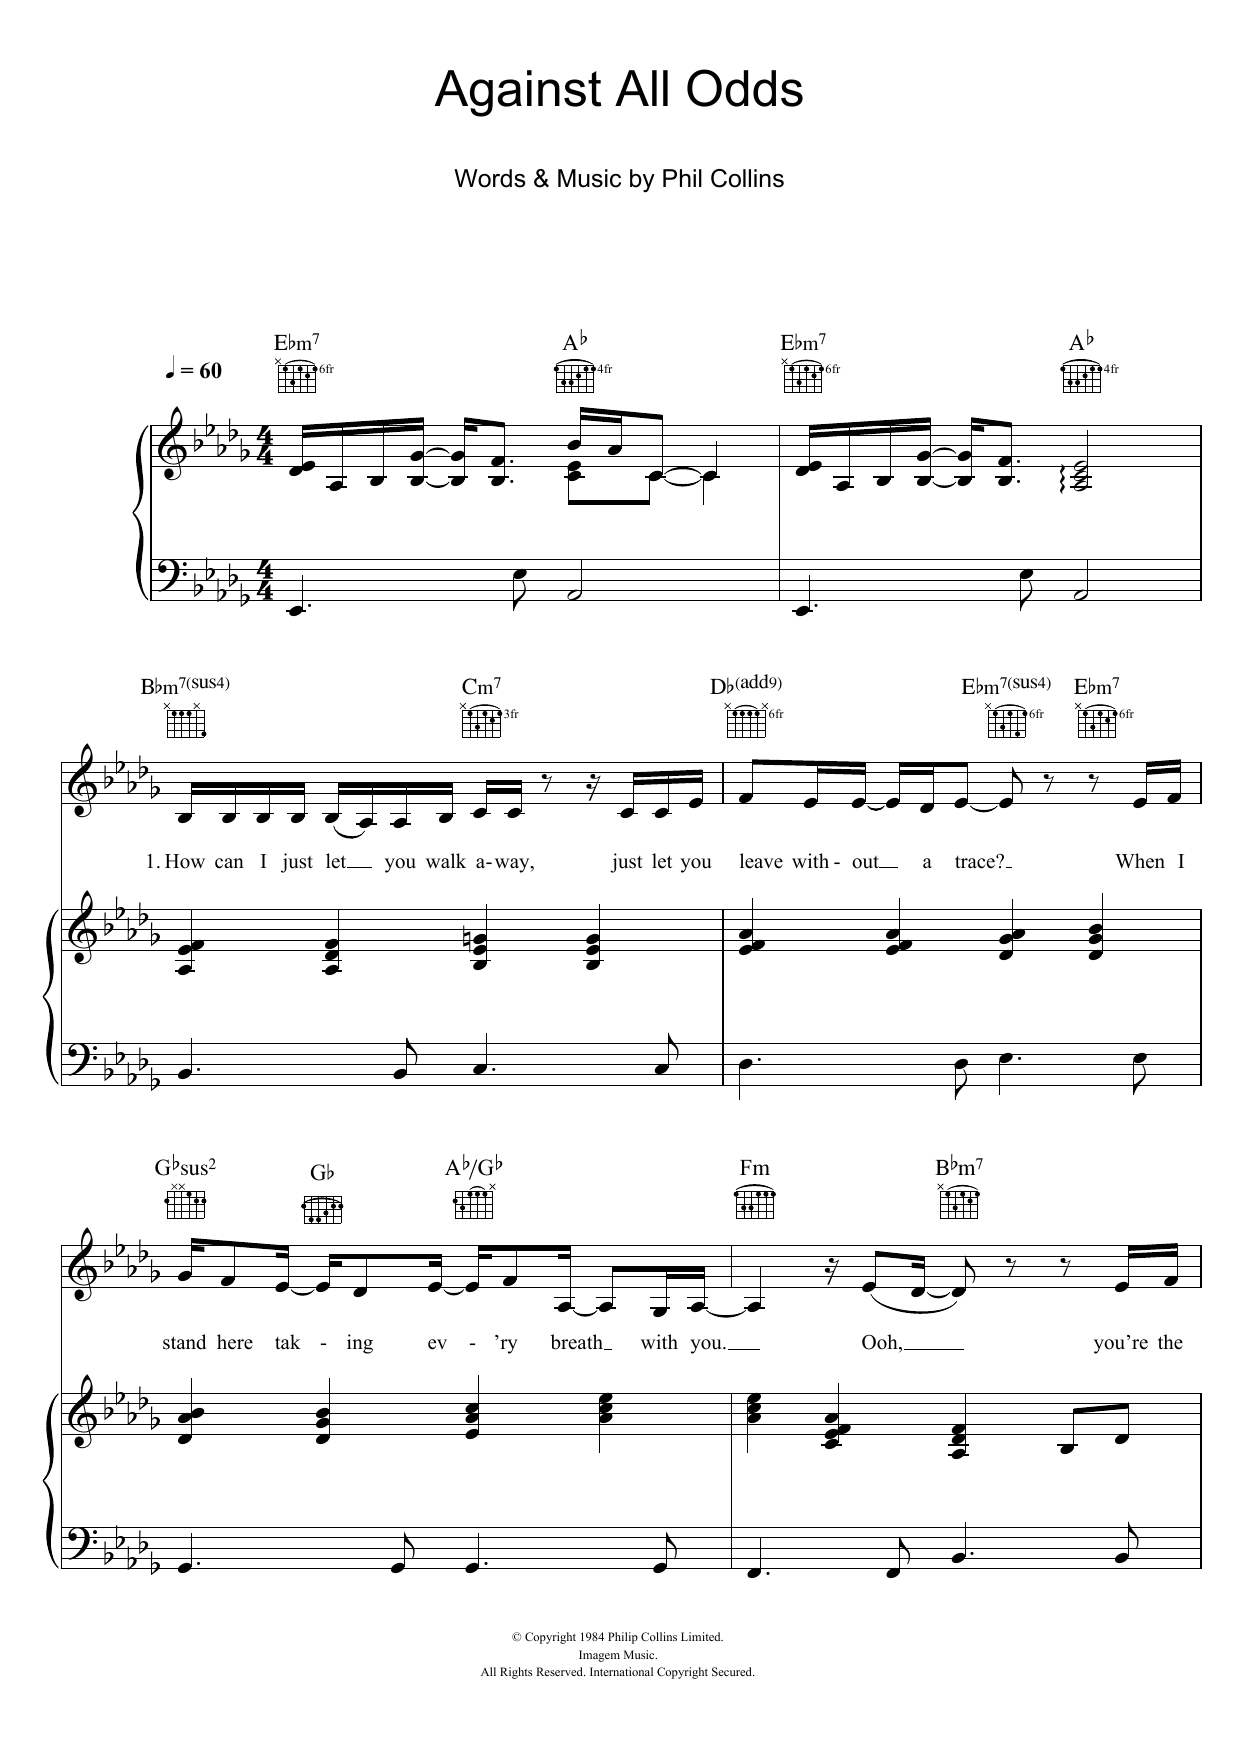 Download Phil Collins Against All Odds (Take A Look At Me Now Sheet Music